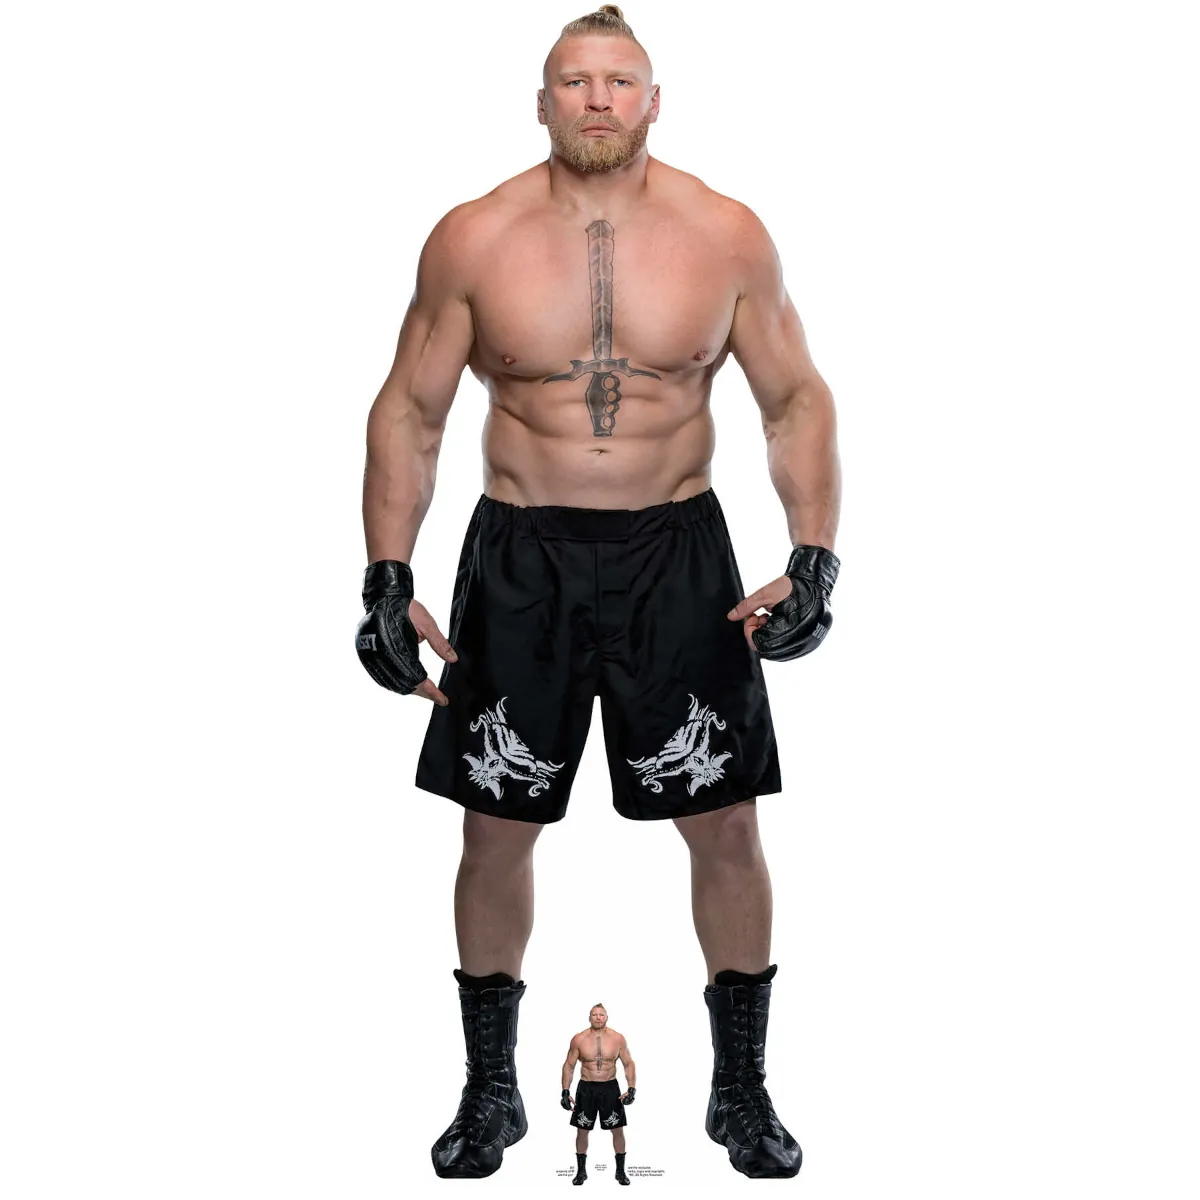 SC4101 Brock Lesnar (WWE) Official Lifesize + Mini Cardboard Cutout Standee Front